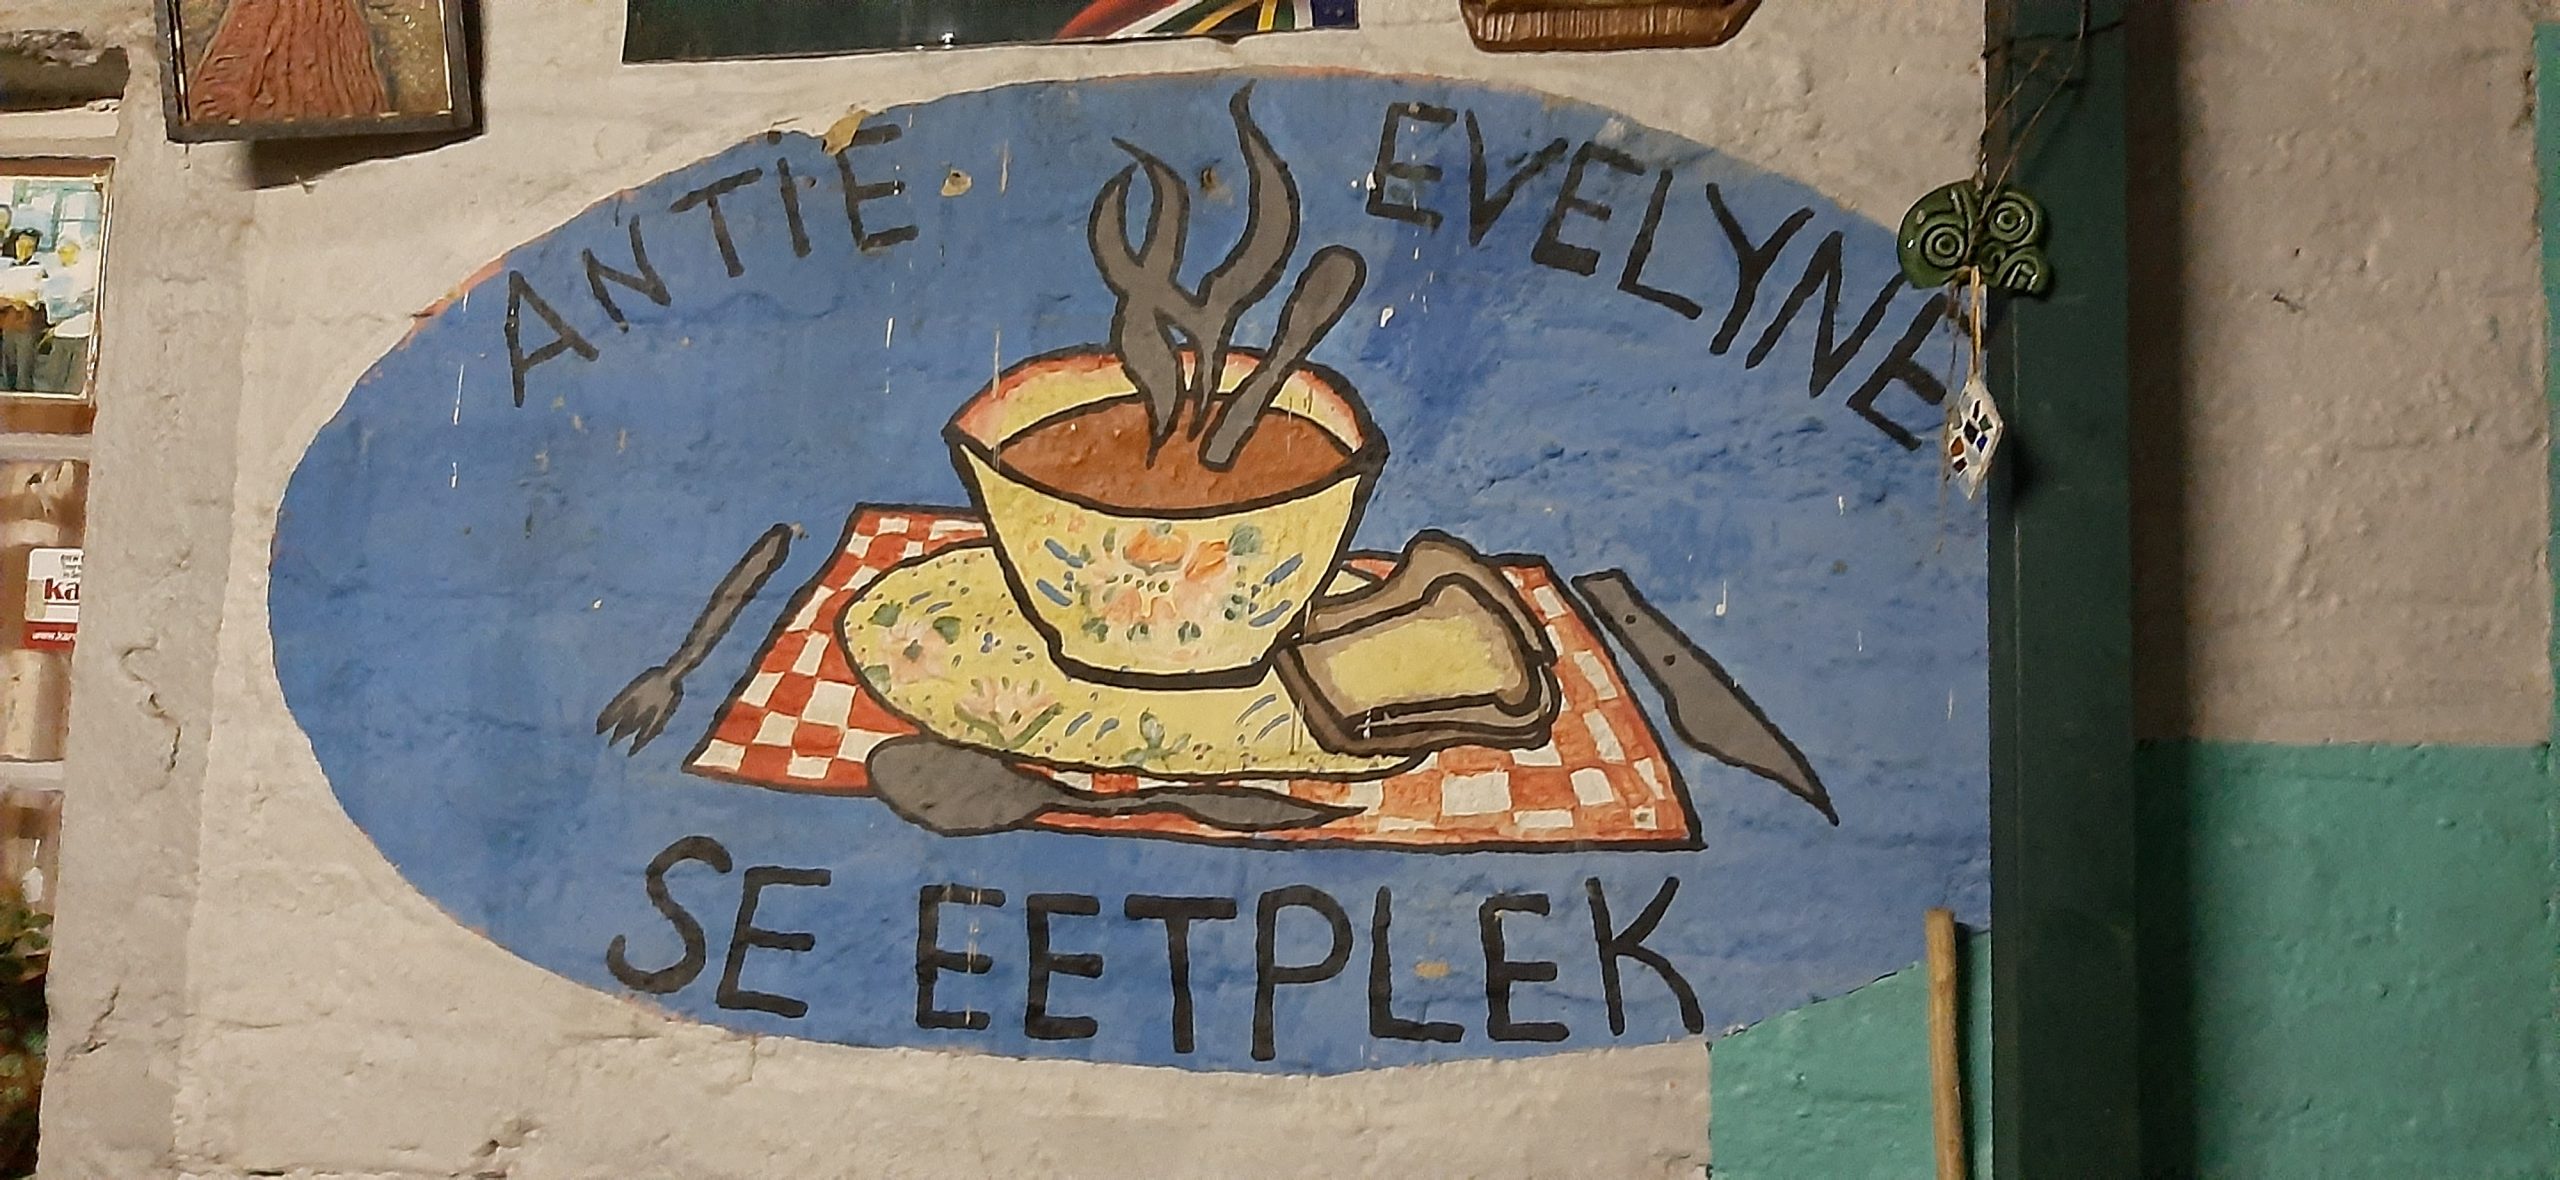 You are currently viewing Antie Evelyn se Eetplek in Nieu-Bethesda